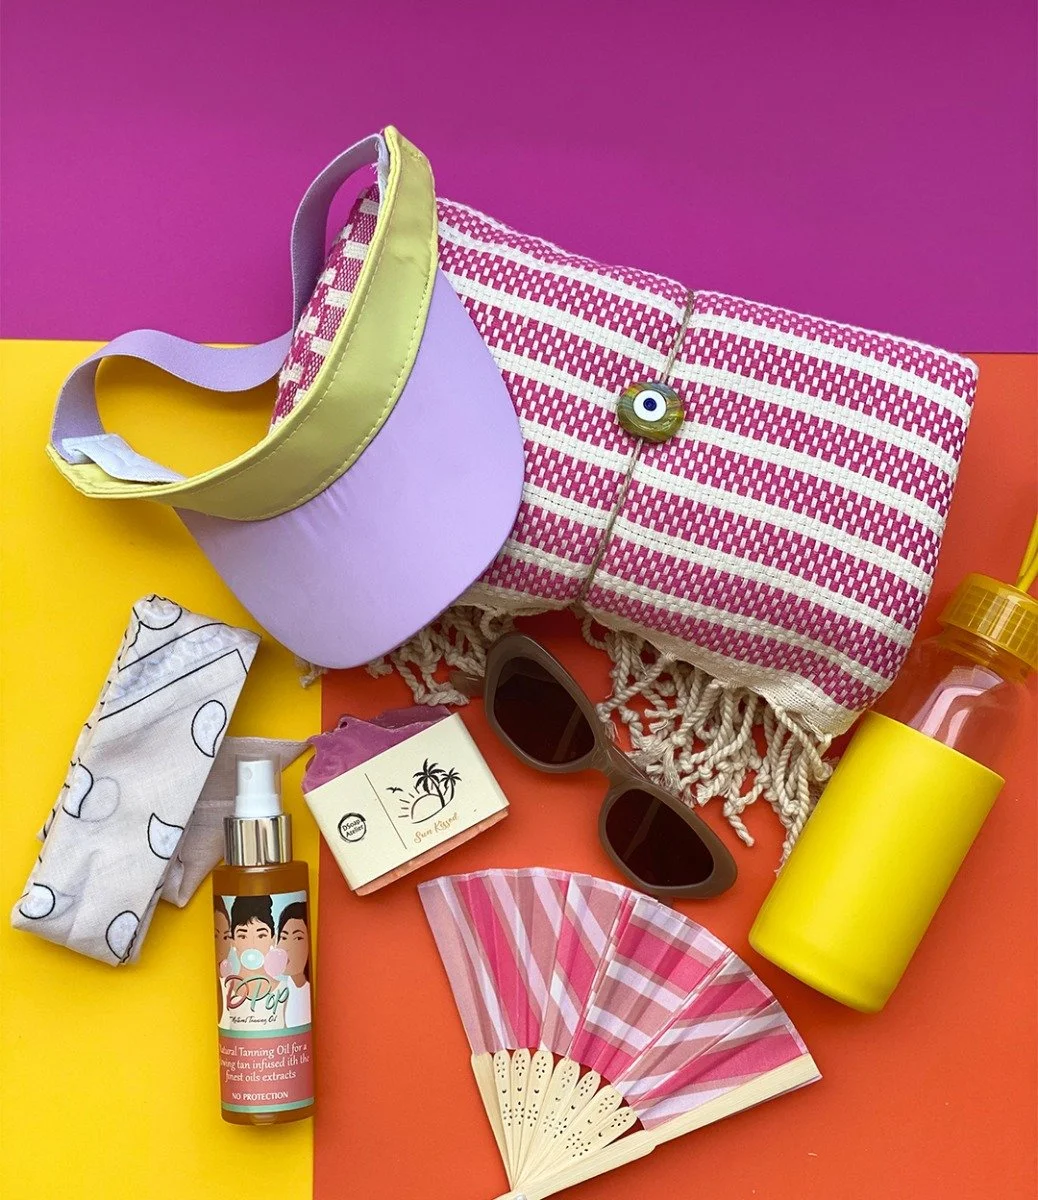 SunKissed Beach Bag by D Soap Atelier*